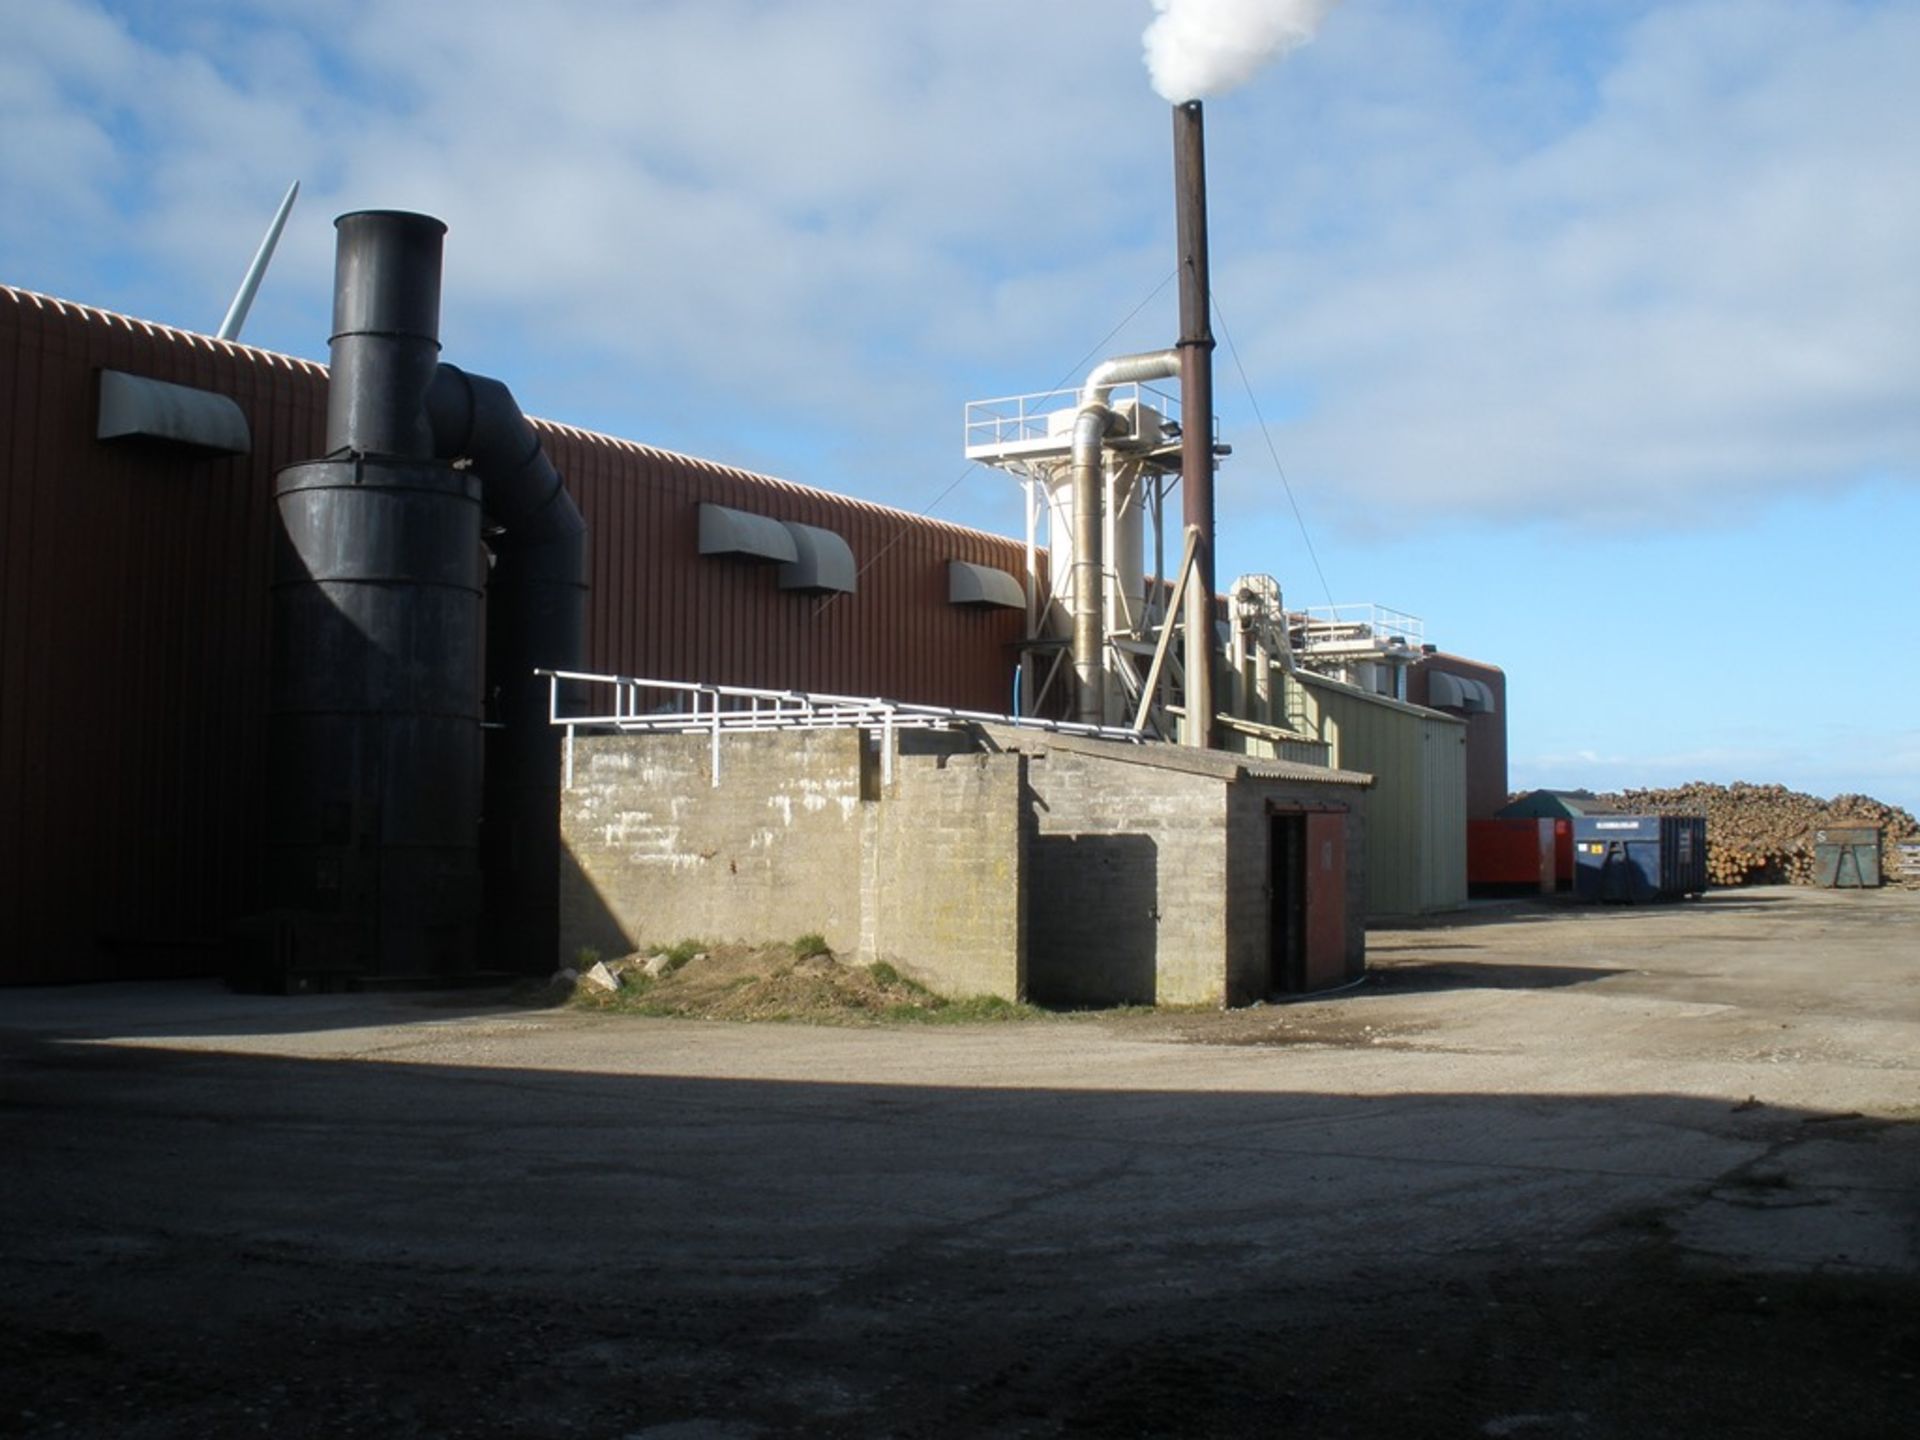 Furnace - Energy Unlimited Biomass Burner, believed built in 2008. It has an output of 5MW - Image 5 of 5